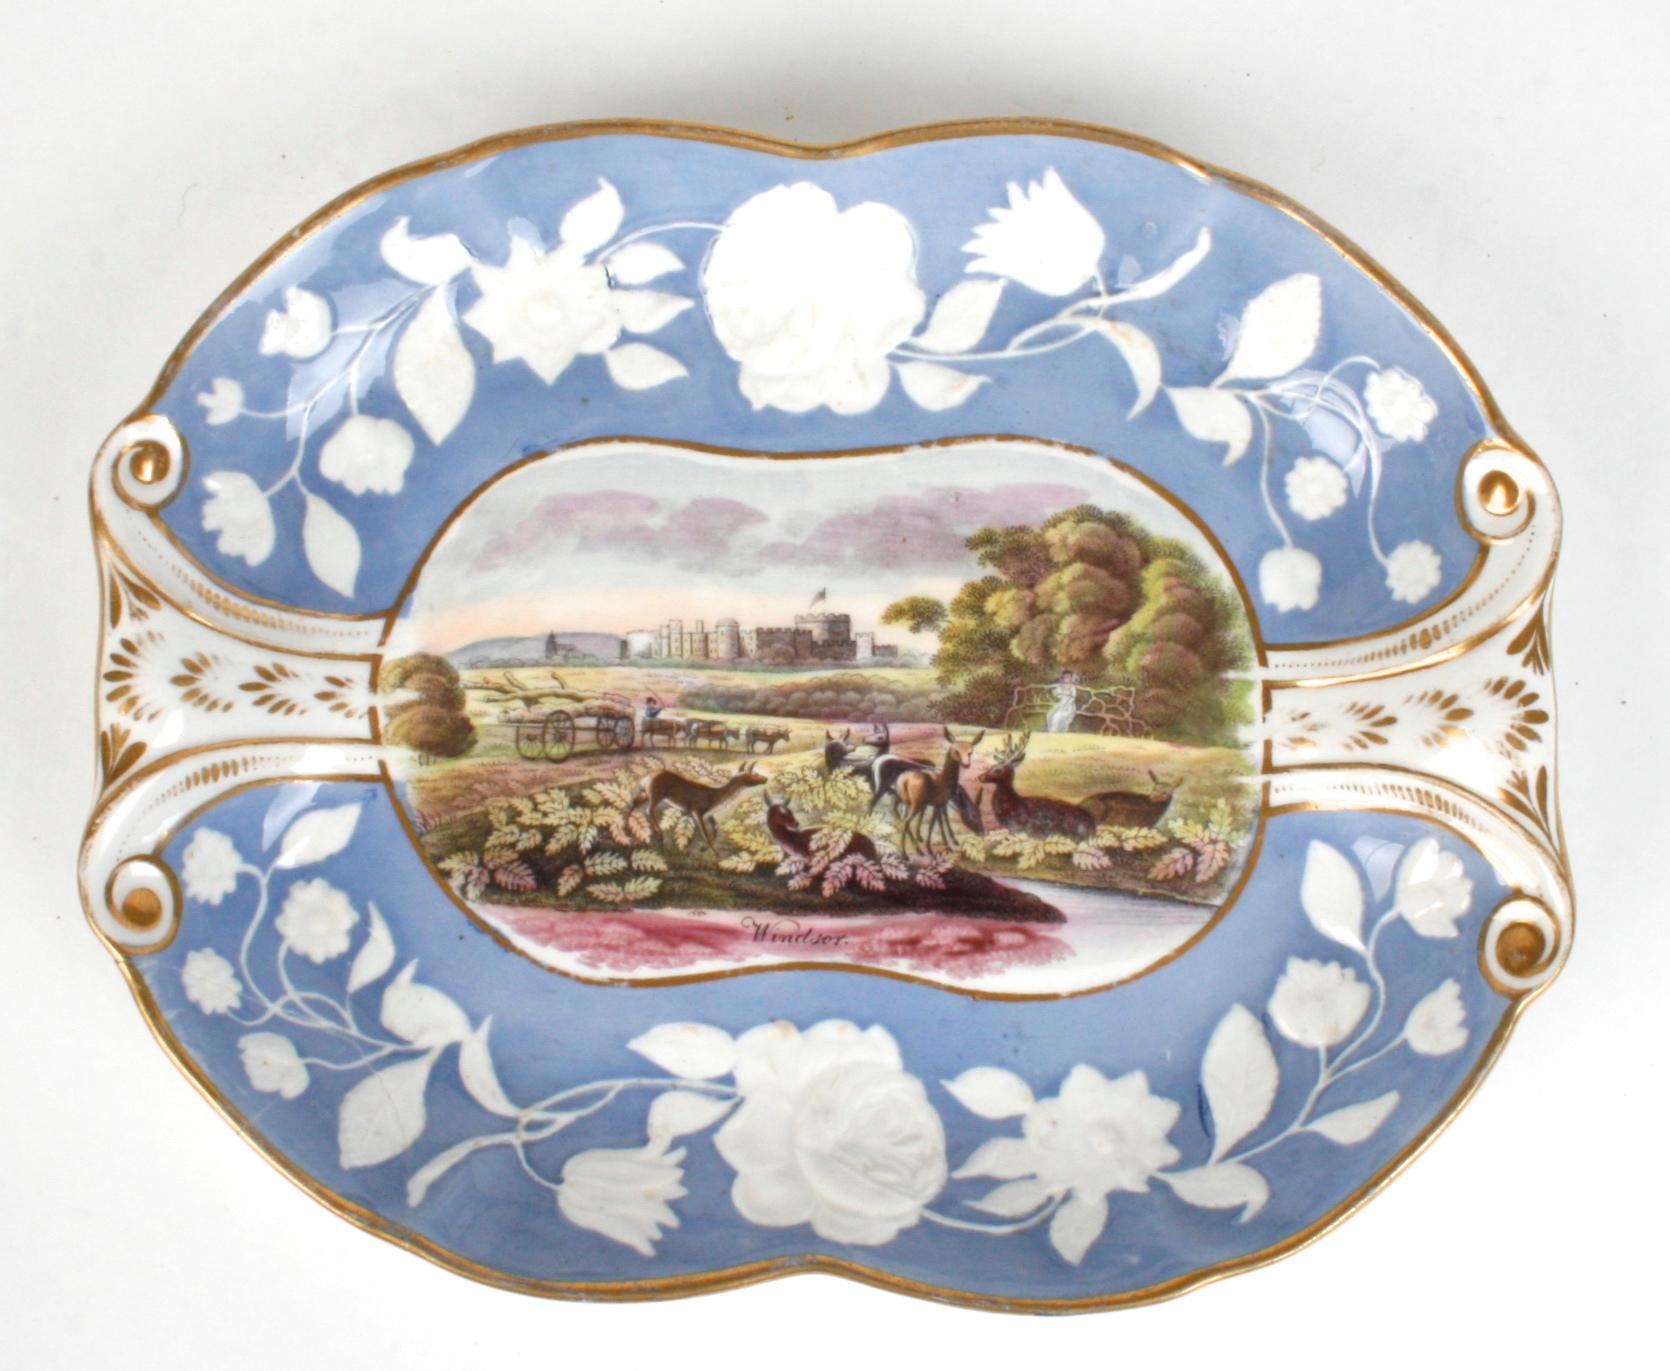 Three English new Hall Pâte-sur-pâte serving pieces with British scenery. Each has a raised floral boarder in blue and white trimmed with gilt accents. The scenes include Windsor Castle, Bush Kill Park and View from Greenwich to Stepford. Newhall